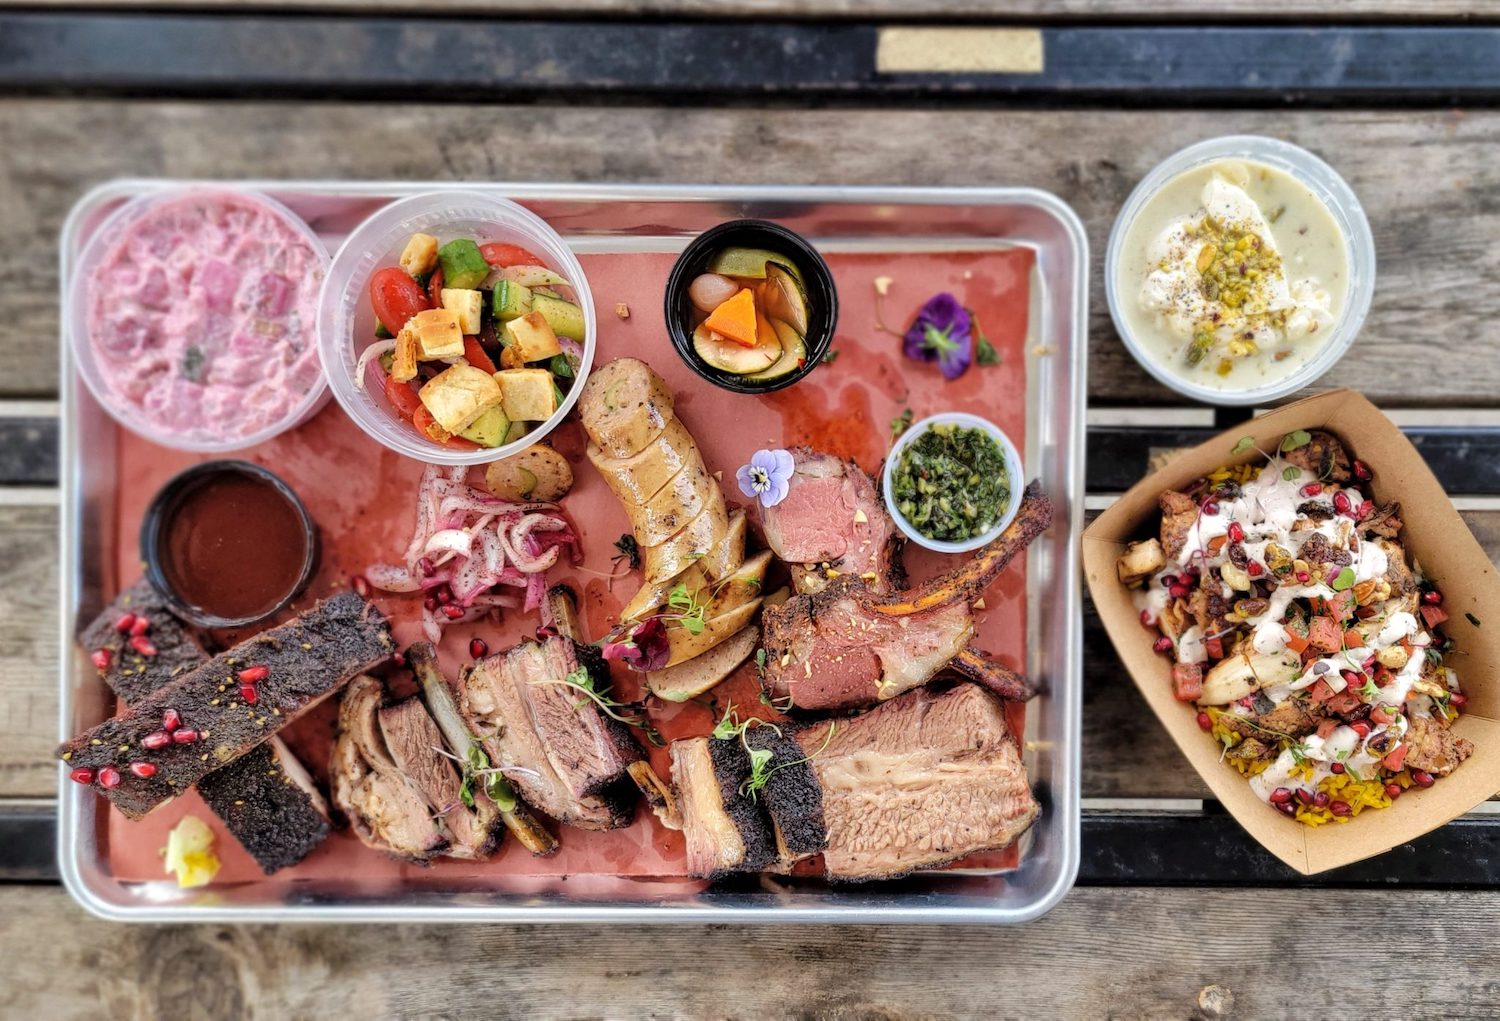 Meat and other sides on a tray